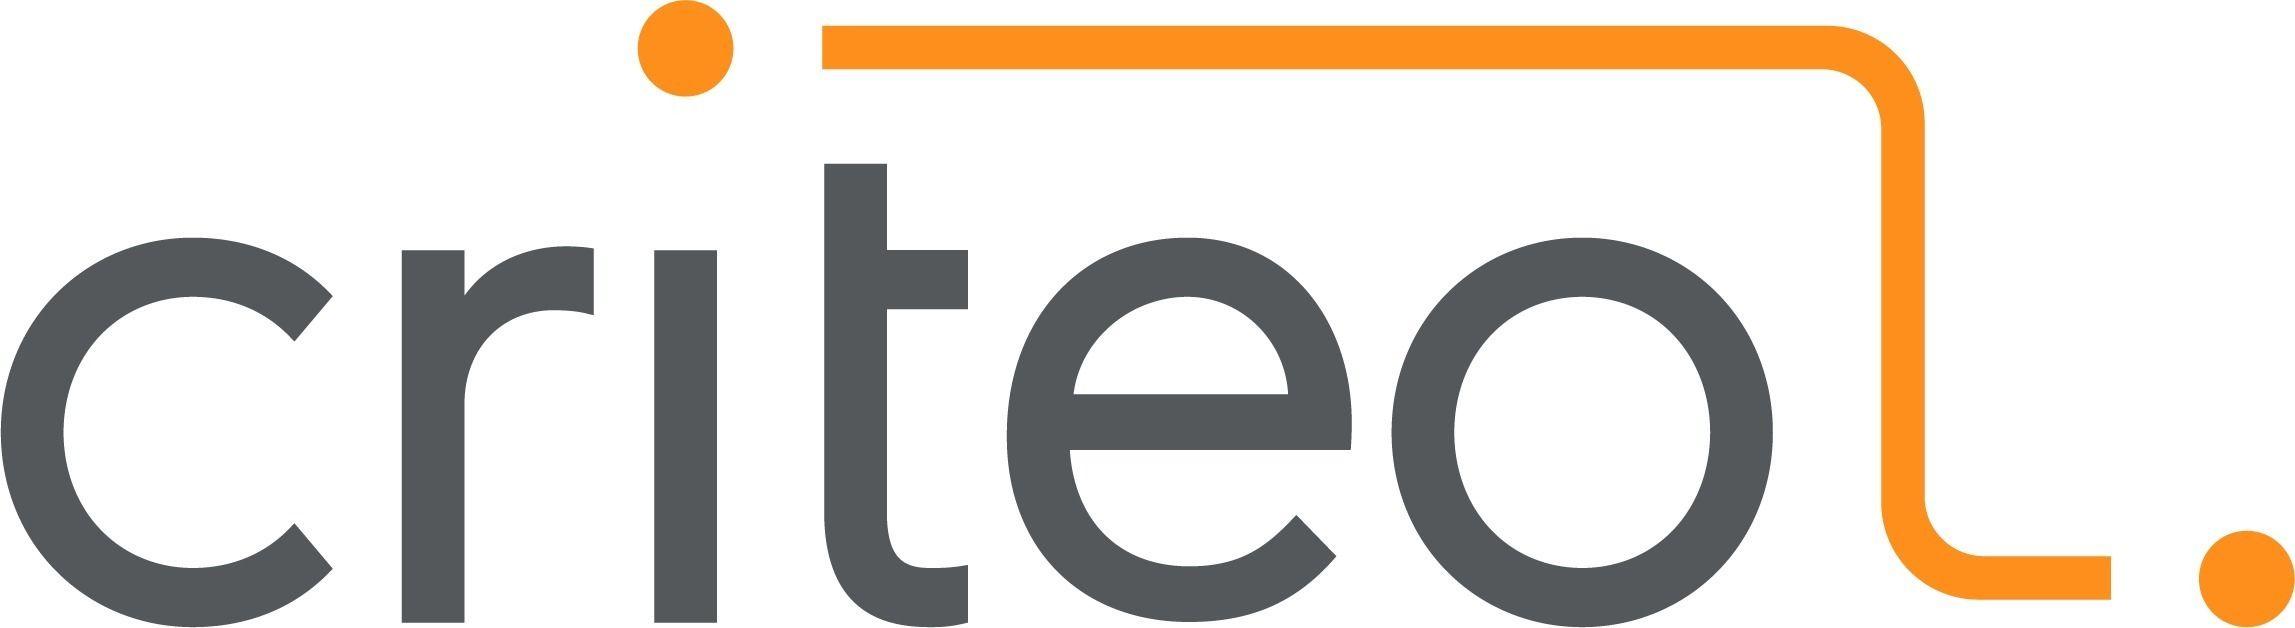 Criteo Logo - Criteo Falls After Yet Another Great Quarter - The Motley Fool